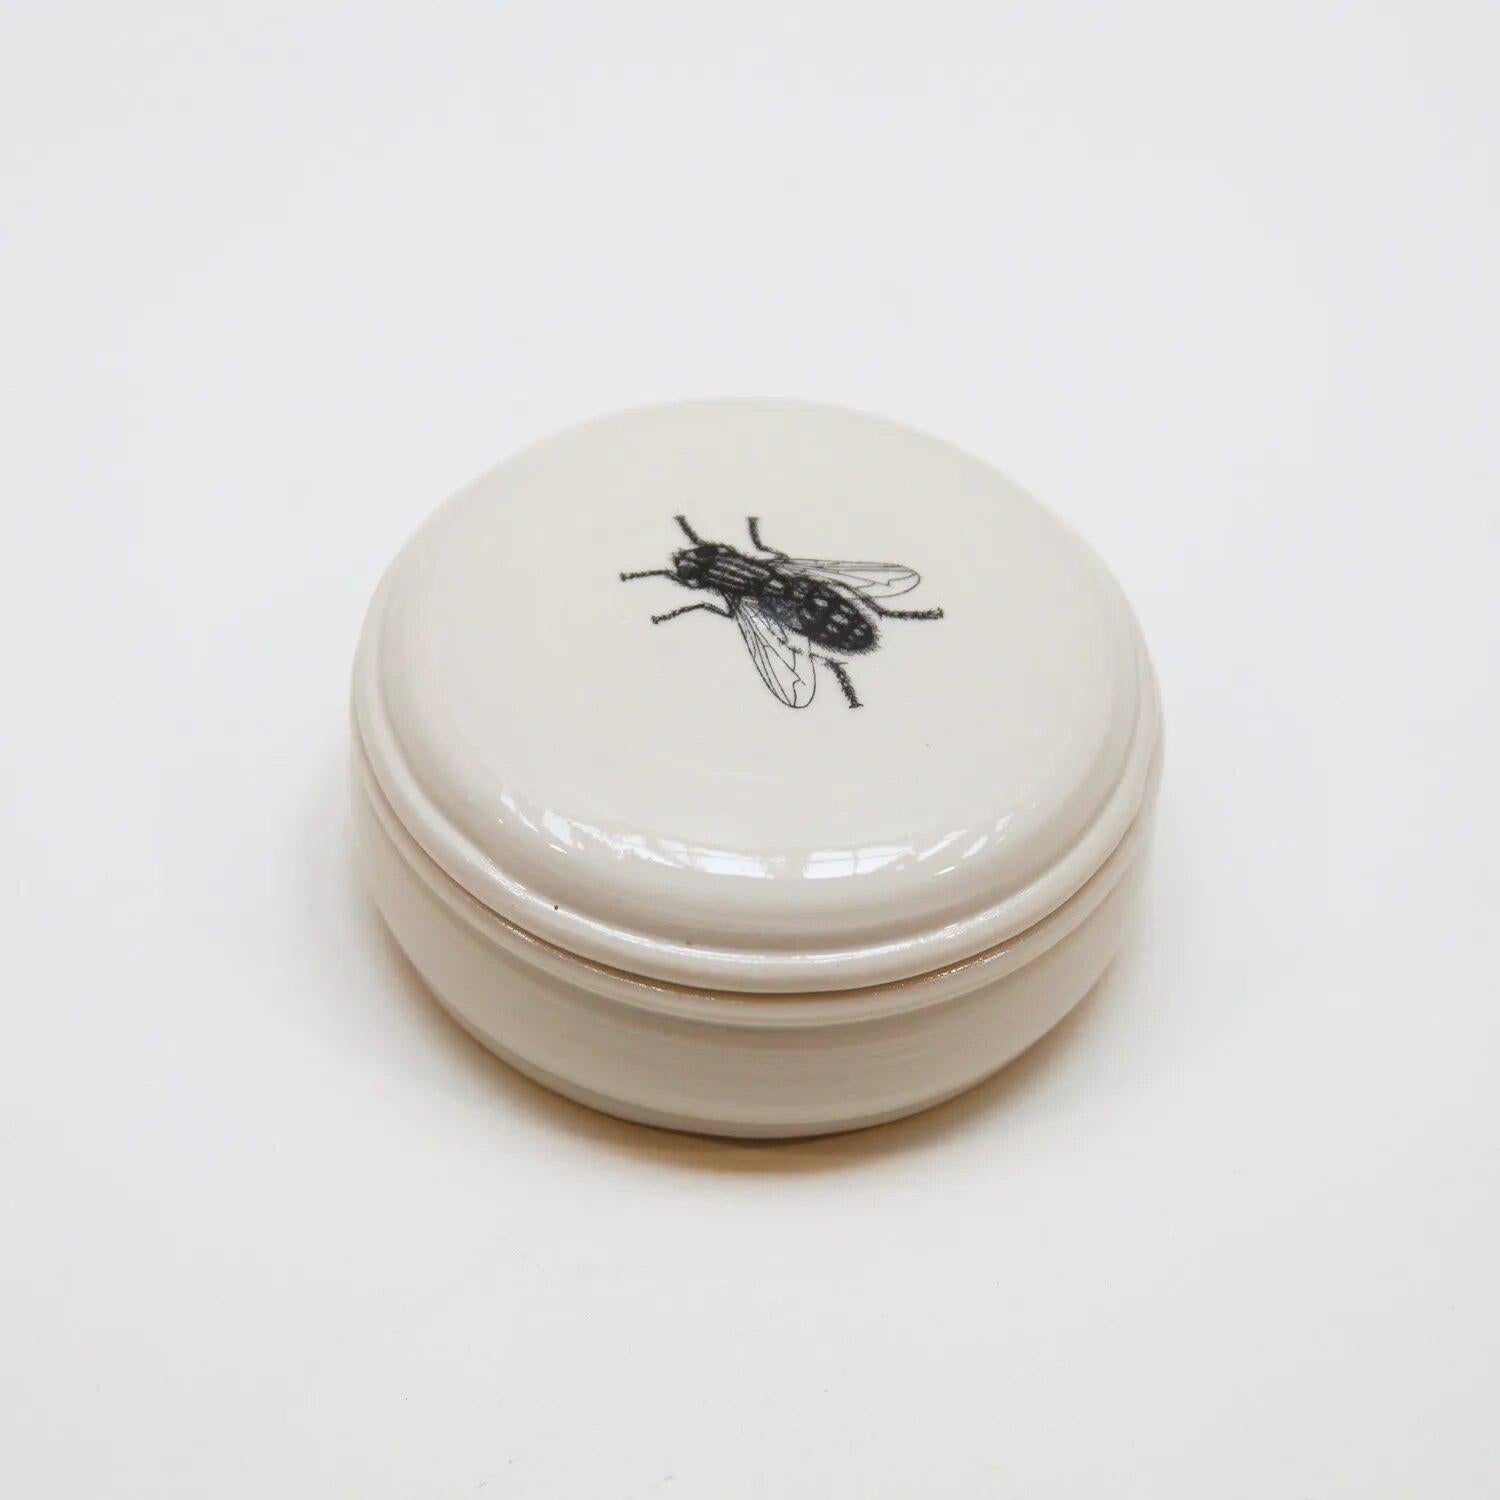 Ceramic Realist Flat Fly Lidded Container